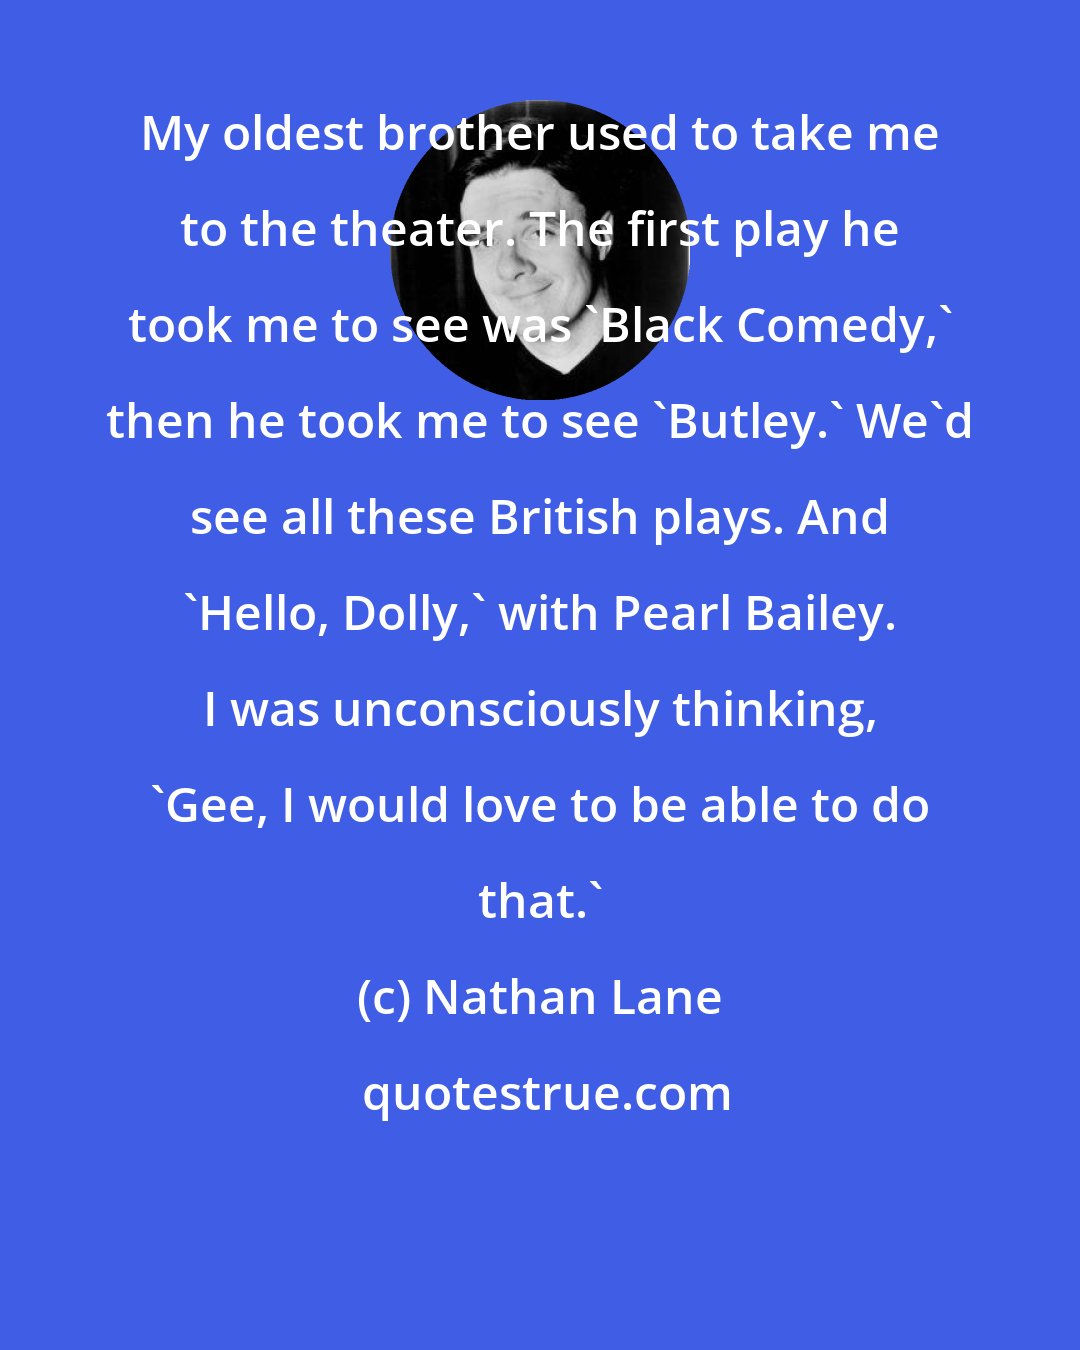 Nathan Lane: My oldest brother used to take me to the theater. The first play he took me to see was 'Black Comedy,' then he took me to see 'Butley.' We'd see all these British plays. And 'Hello, Dolly,' with Pearl Bailey. I was unconsciously thinking, 'Gee, I would love to be able to do that.'